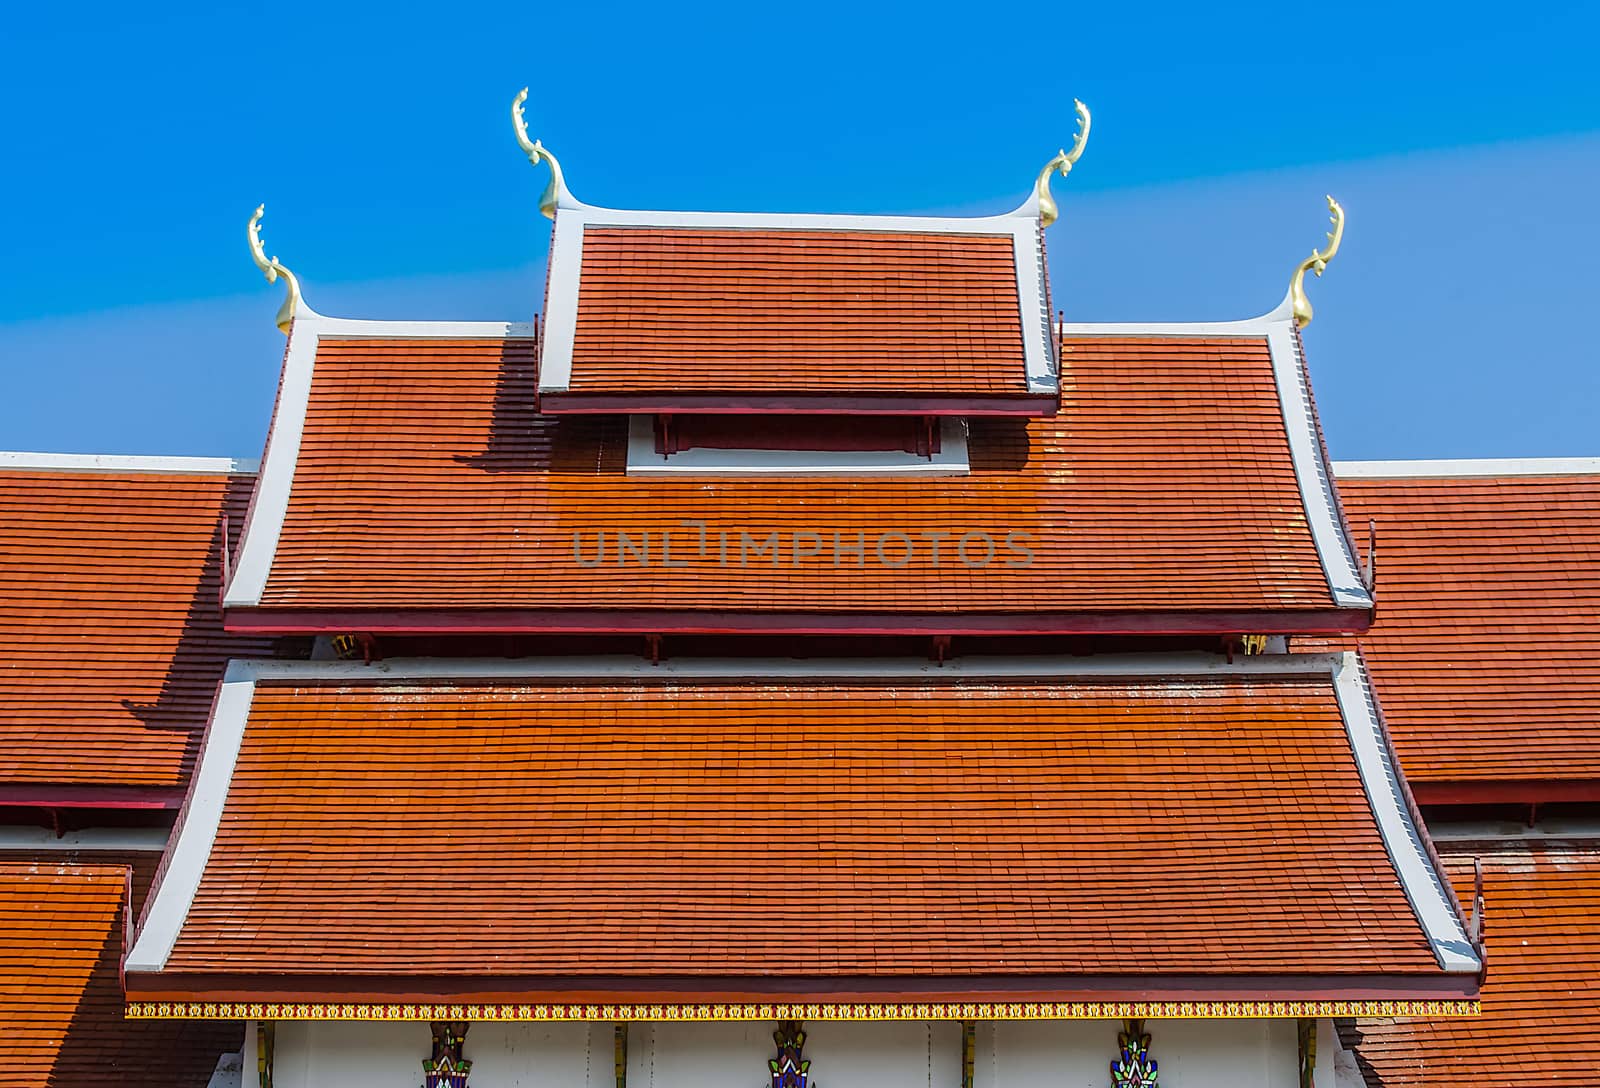 Roof of Temple by kobfujar